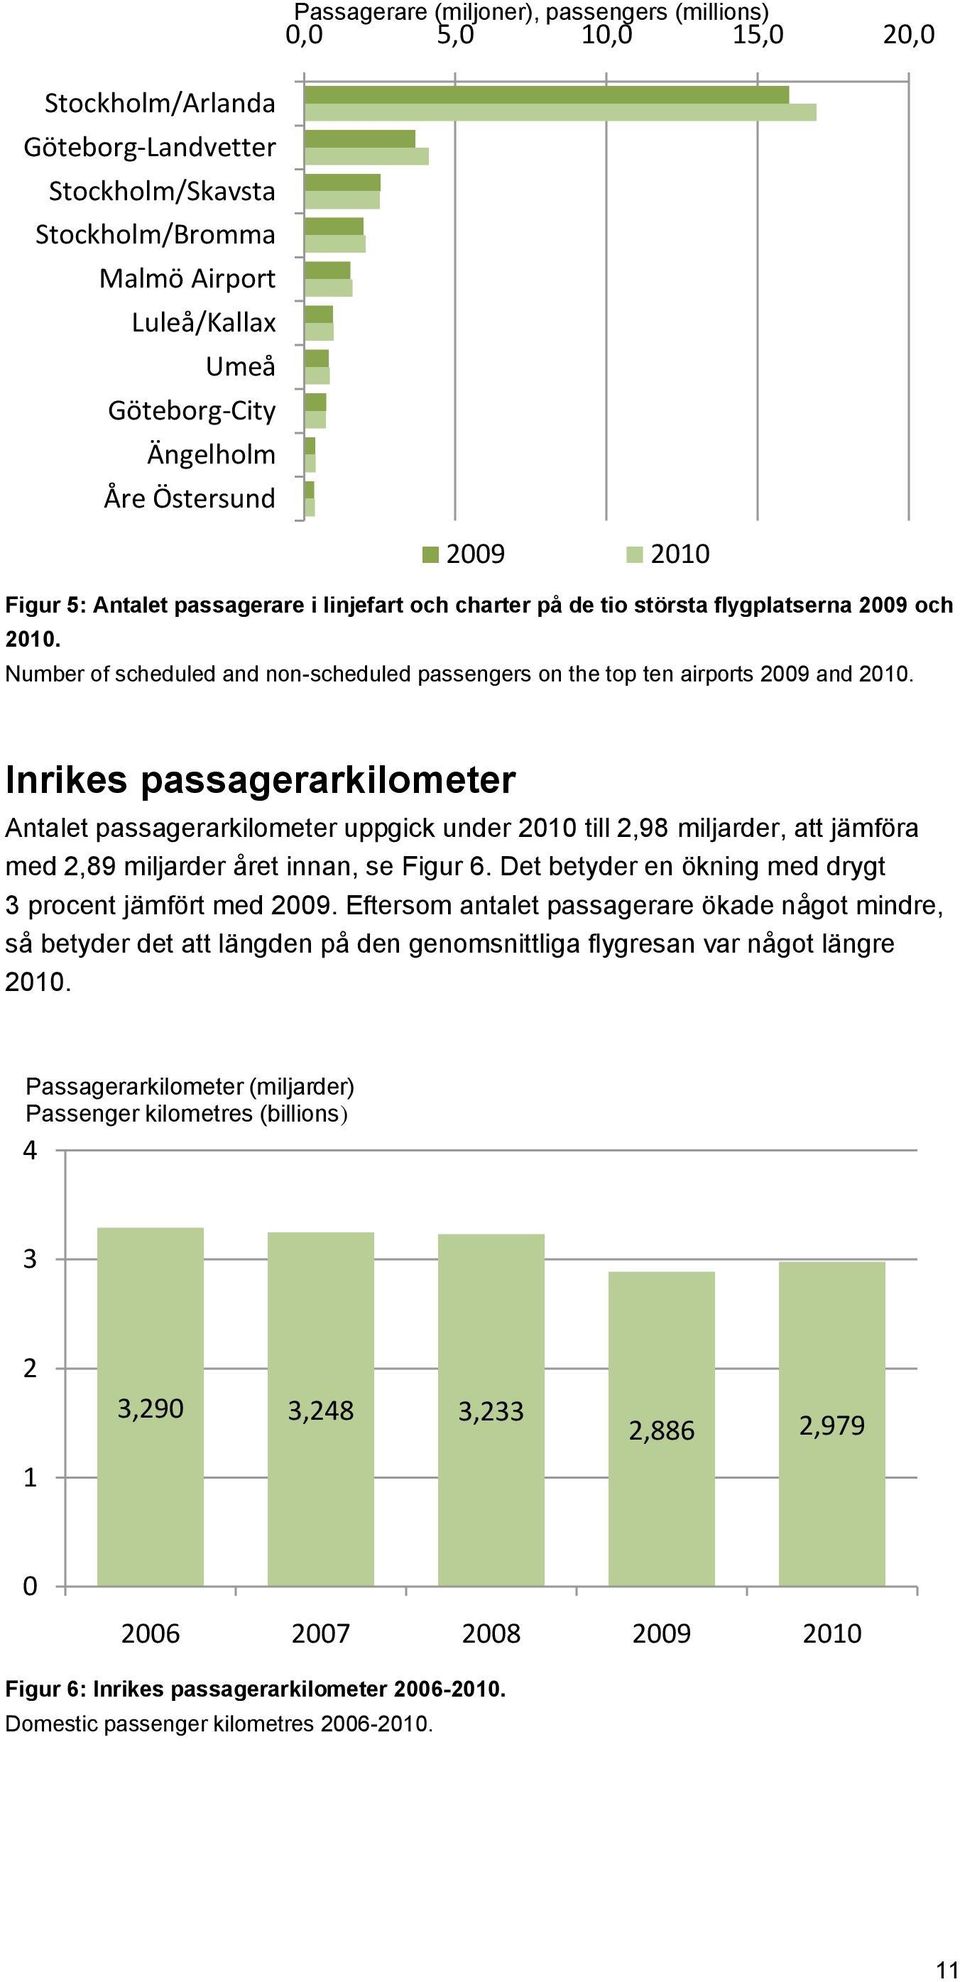 Number of scheduled and non-scheduled passengers on the top ten airports 2009 and 2010.